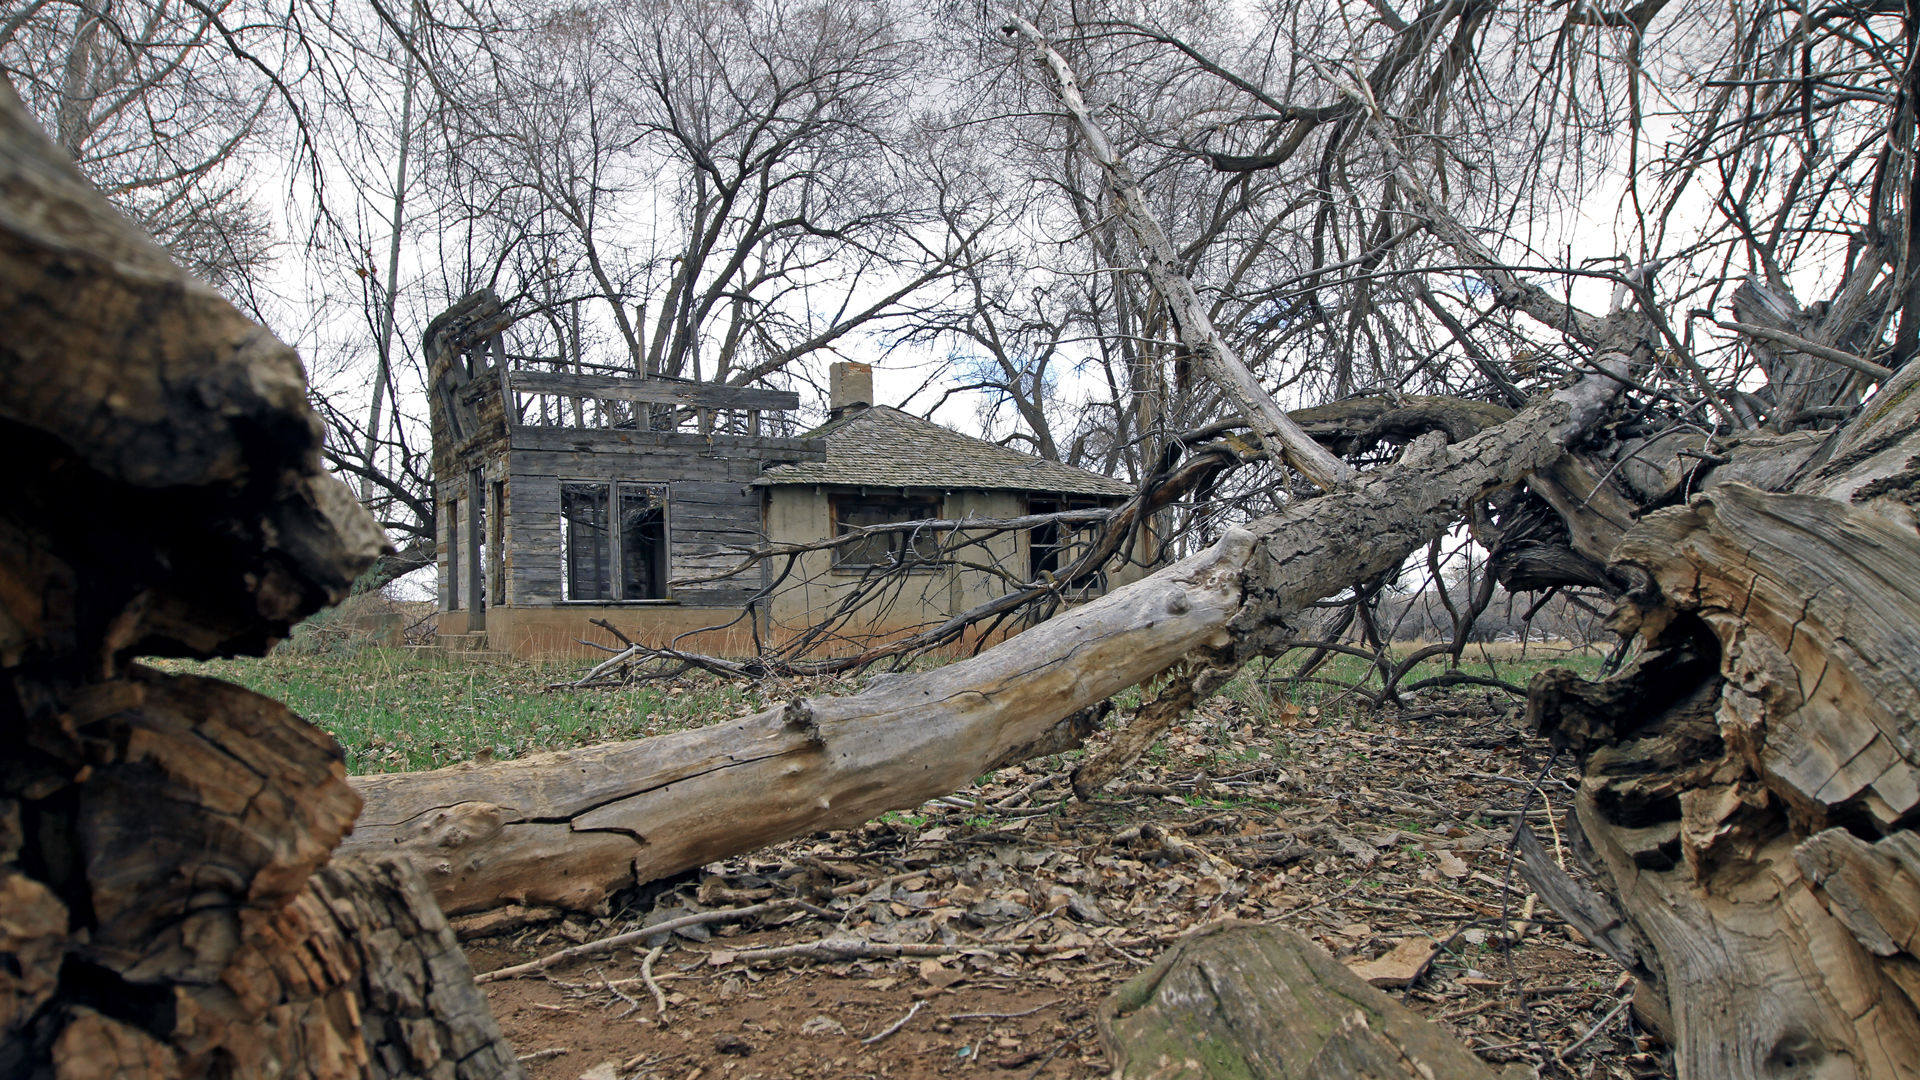 Read More: How Skinwalker Ranch Became a Hotbed of Paranormal Activity